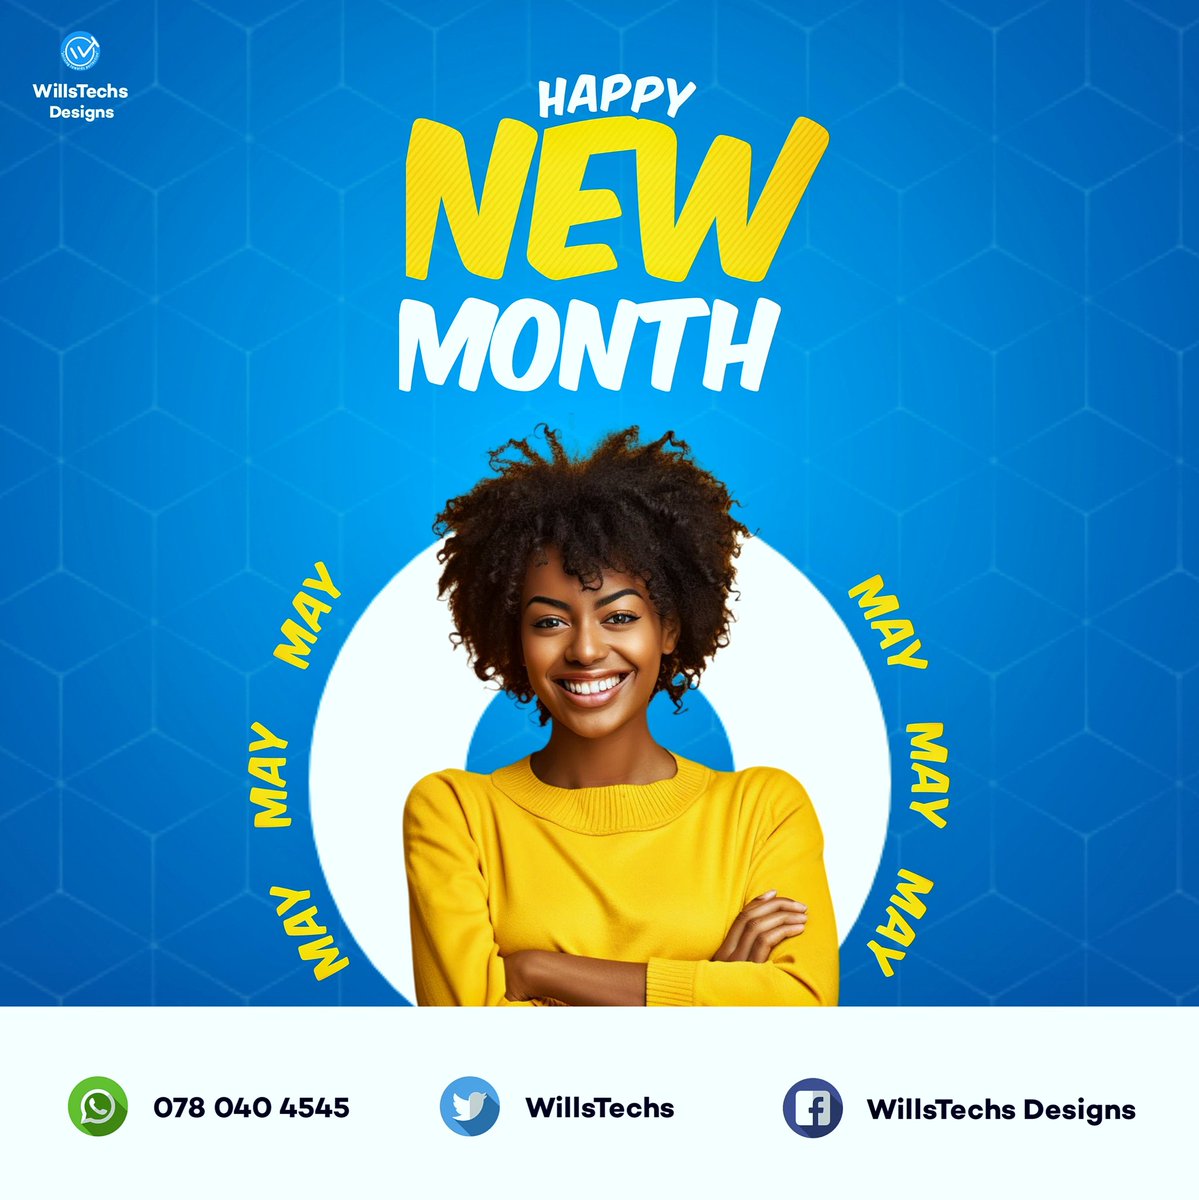 Wishing you a Happy New Month! May each day be a testimony of God’s love and mercy. May He fulfill your heart’s desires and keep you safe. Blessings to you!🙏🏾
#newmonth 
#workersday 
#StrivingTowardsPerfection